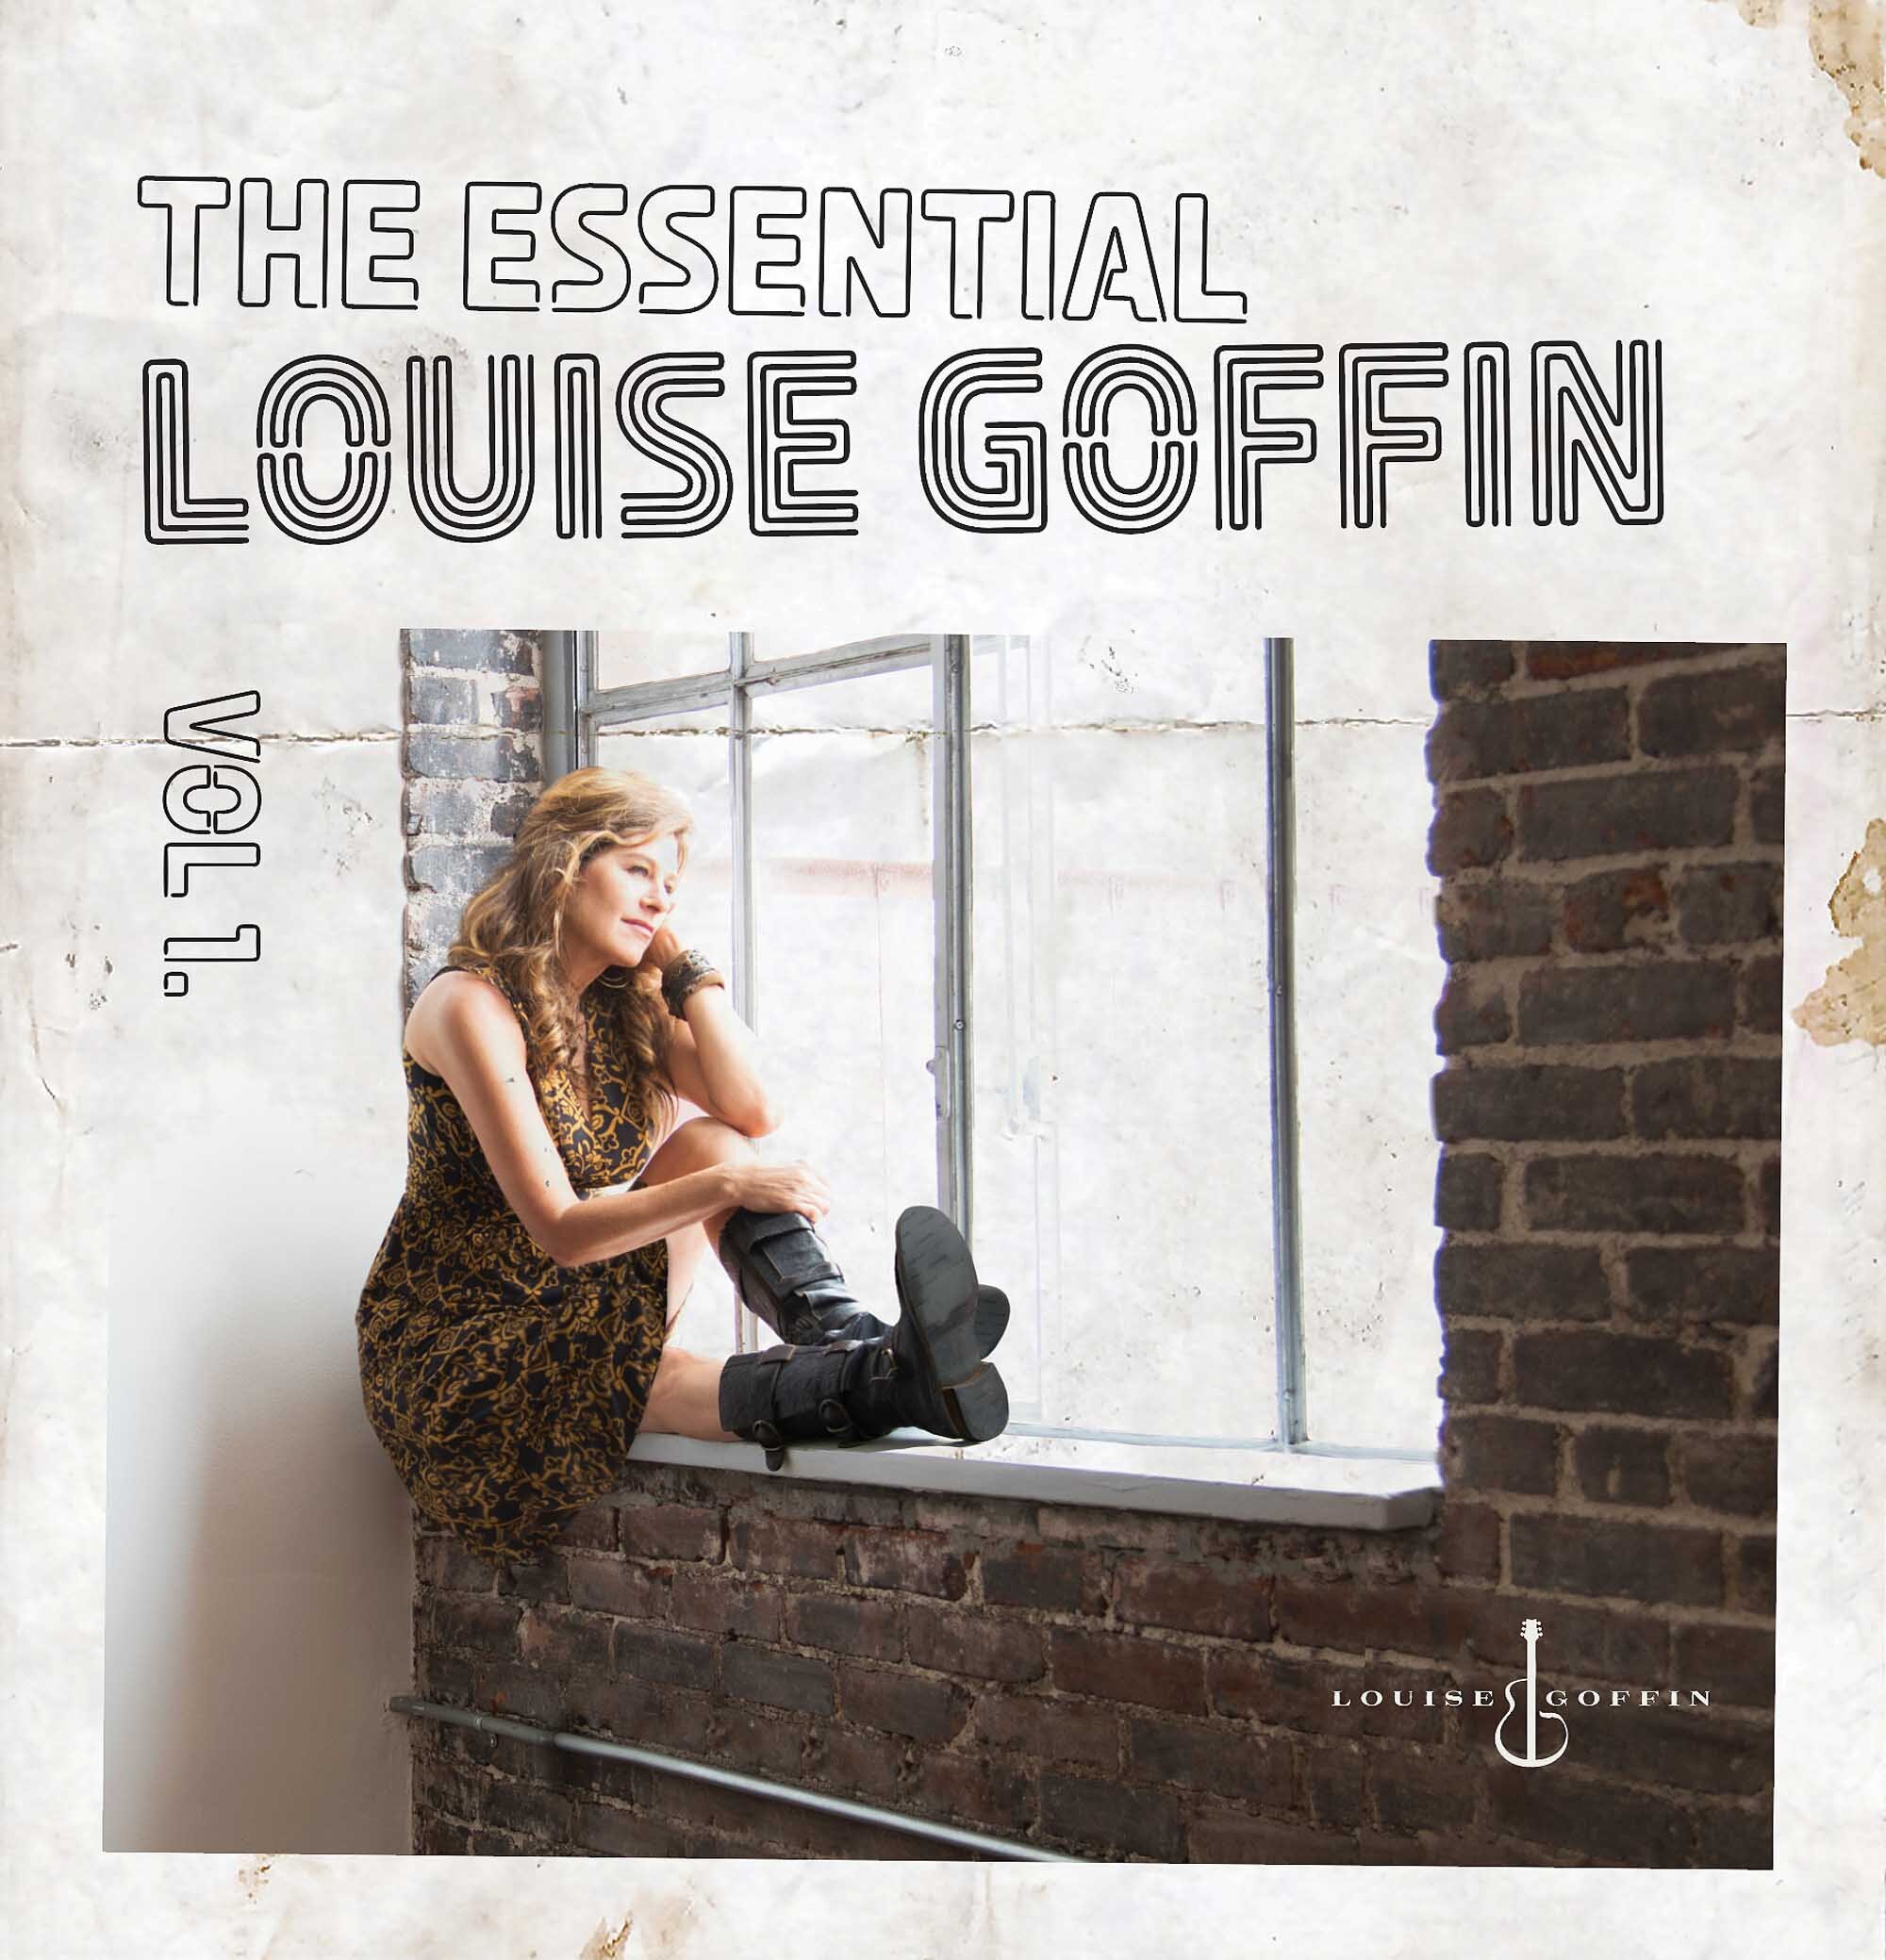 Hi Res Essential_Louise Goffin_front Album Cover Final_.jpg